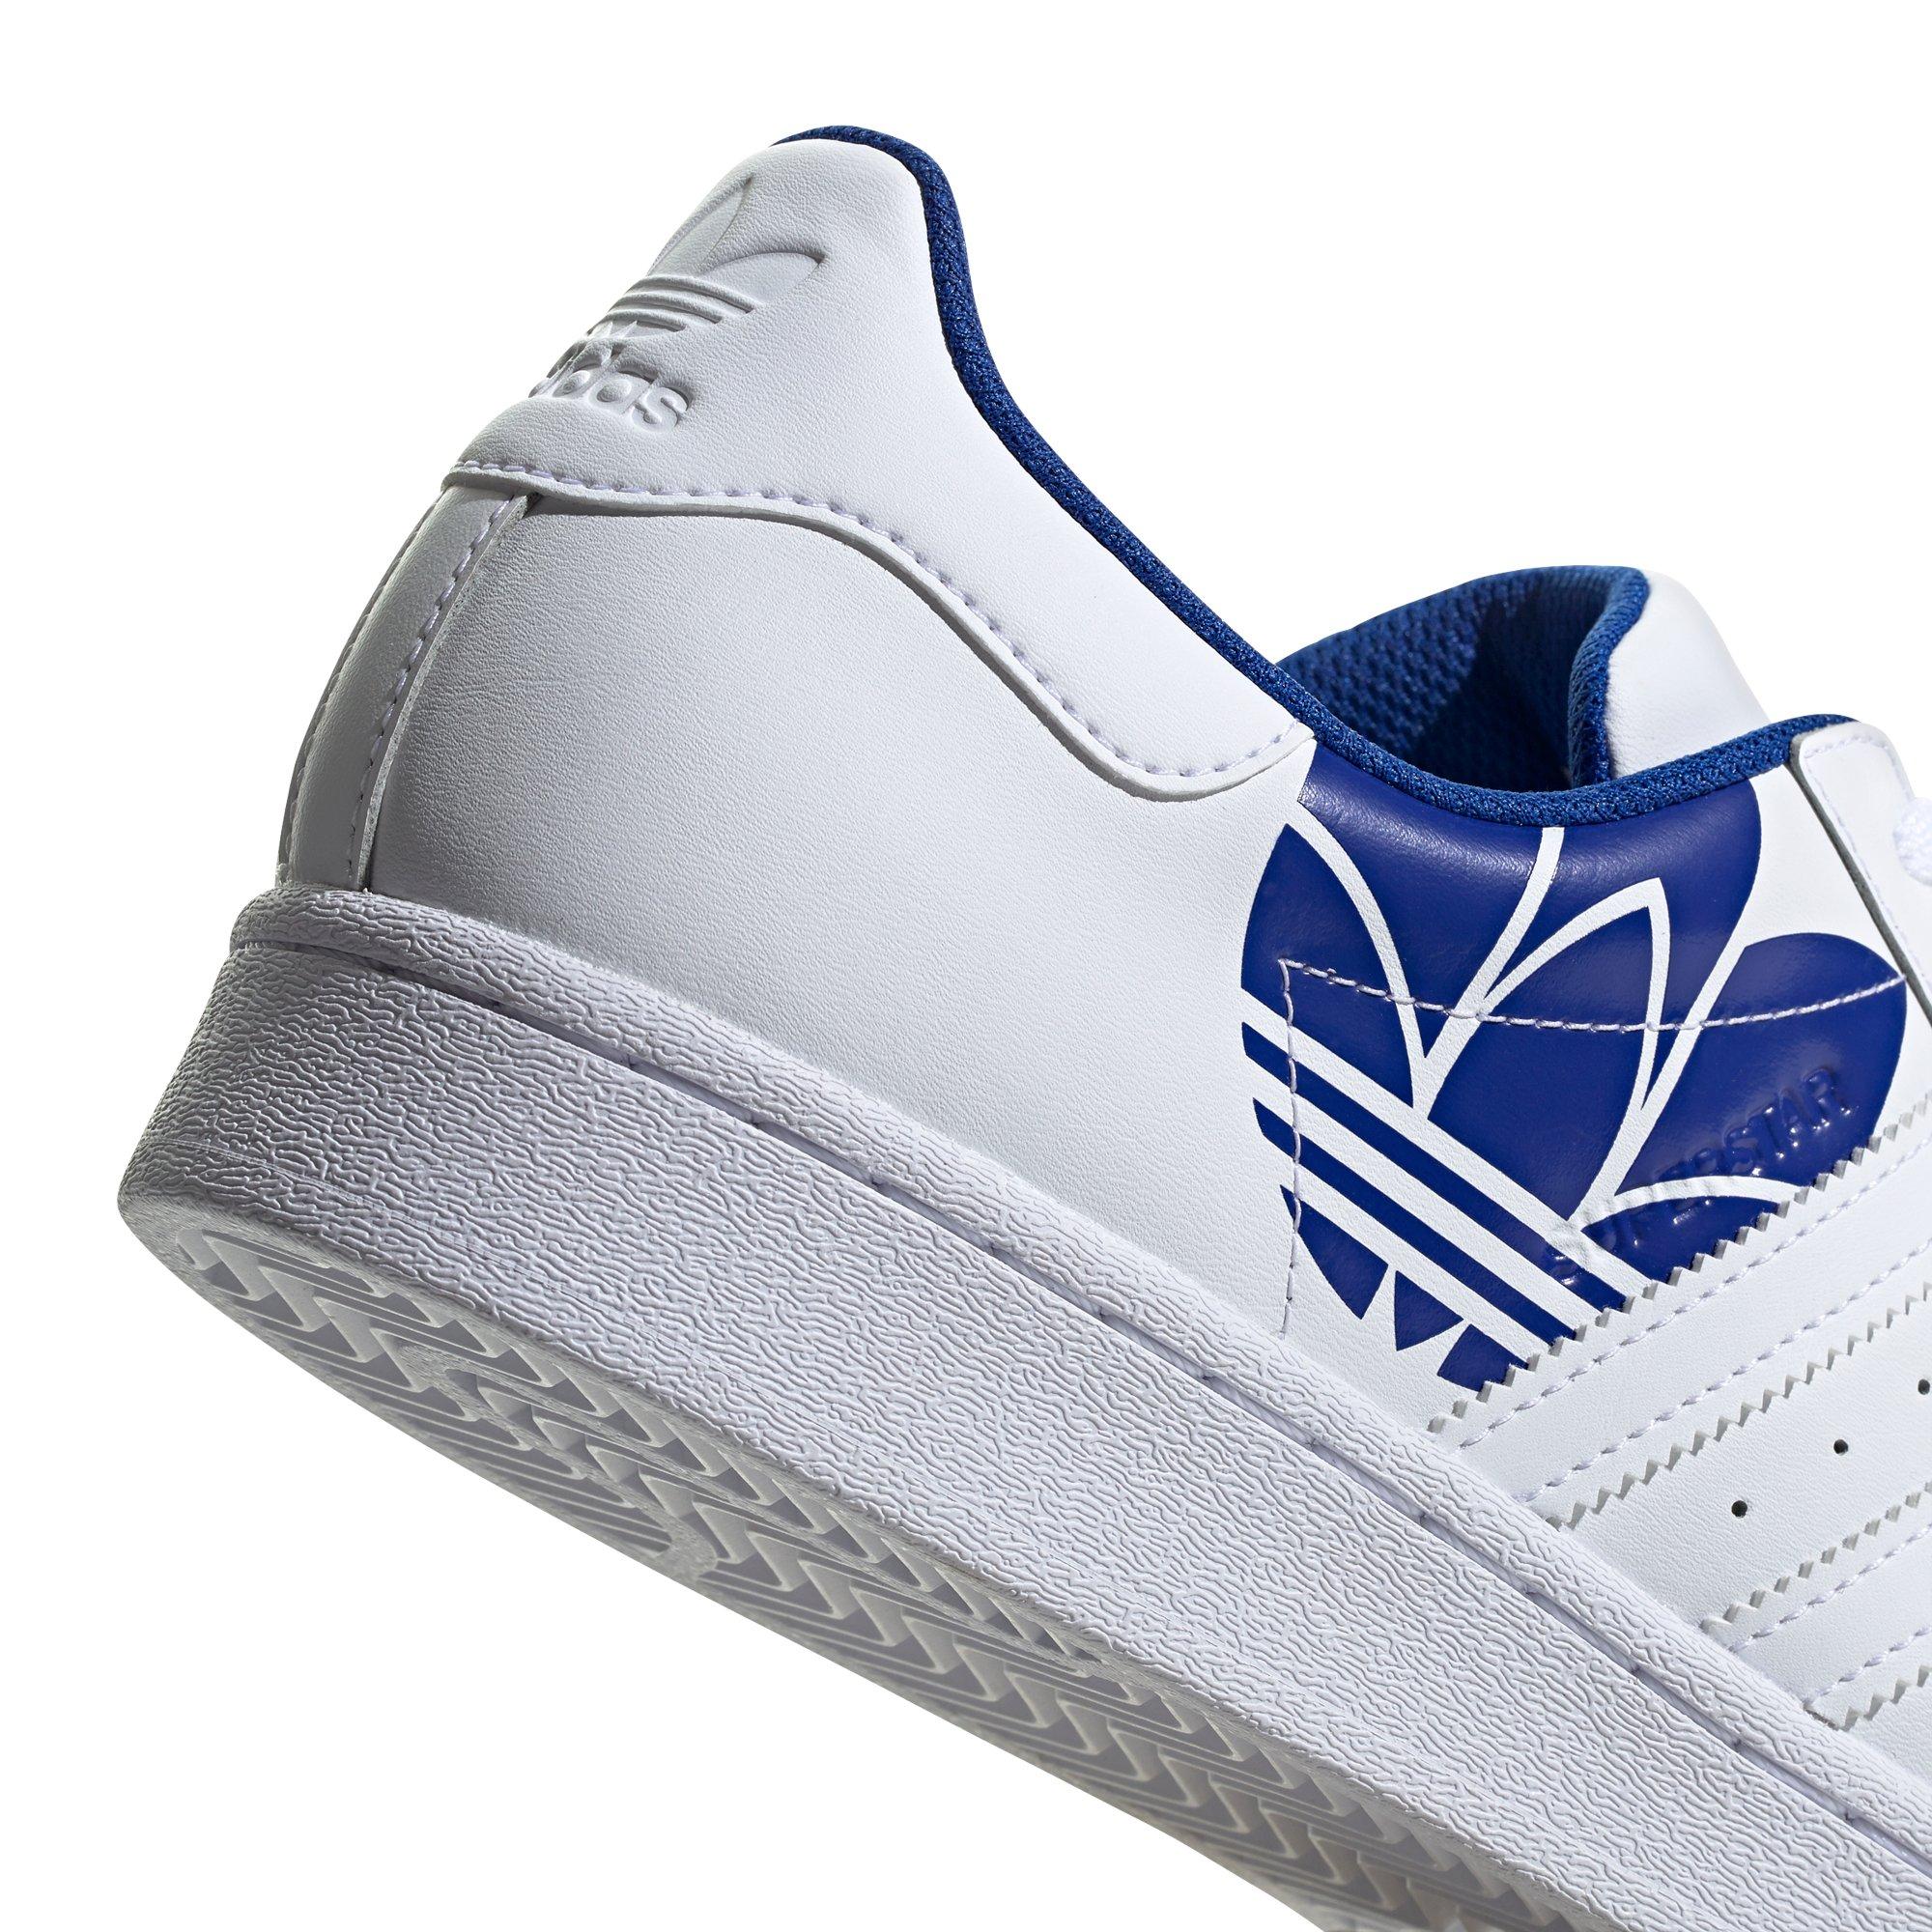 adidas superstar white and blue